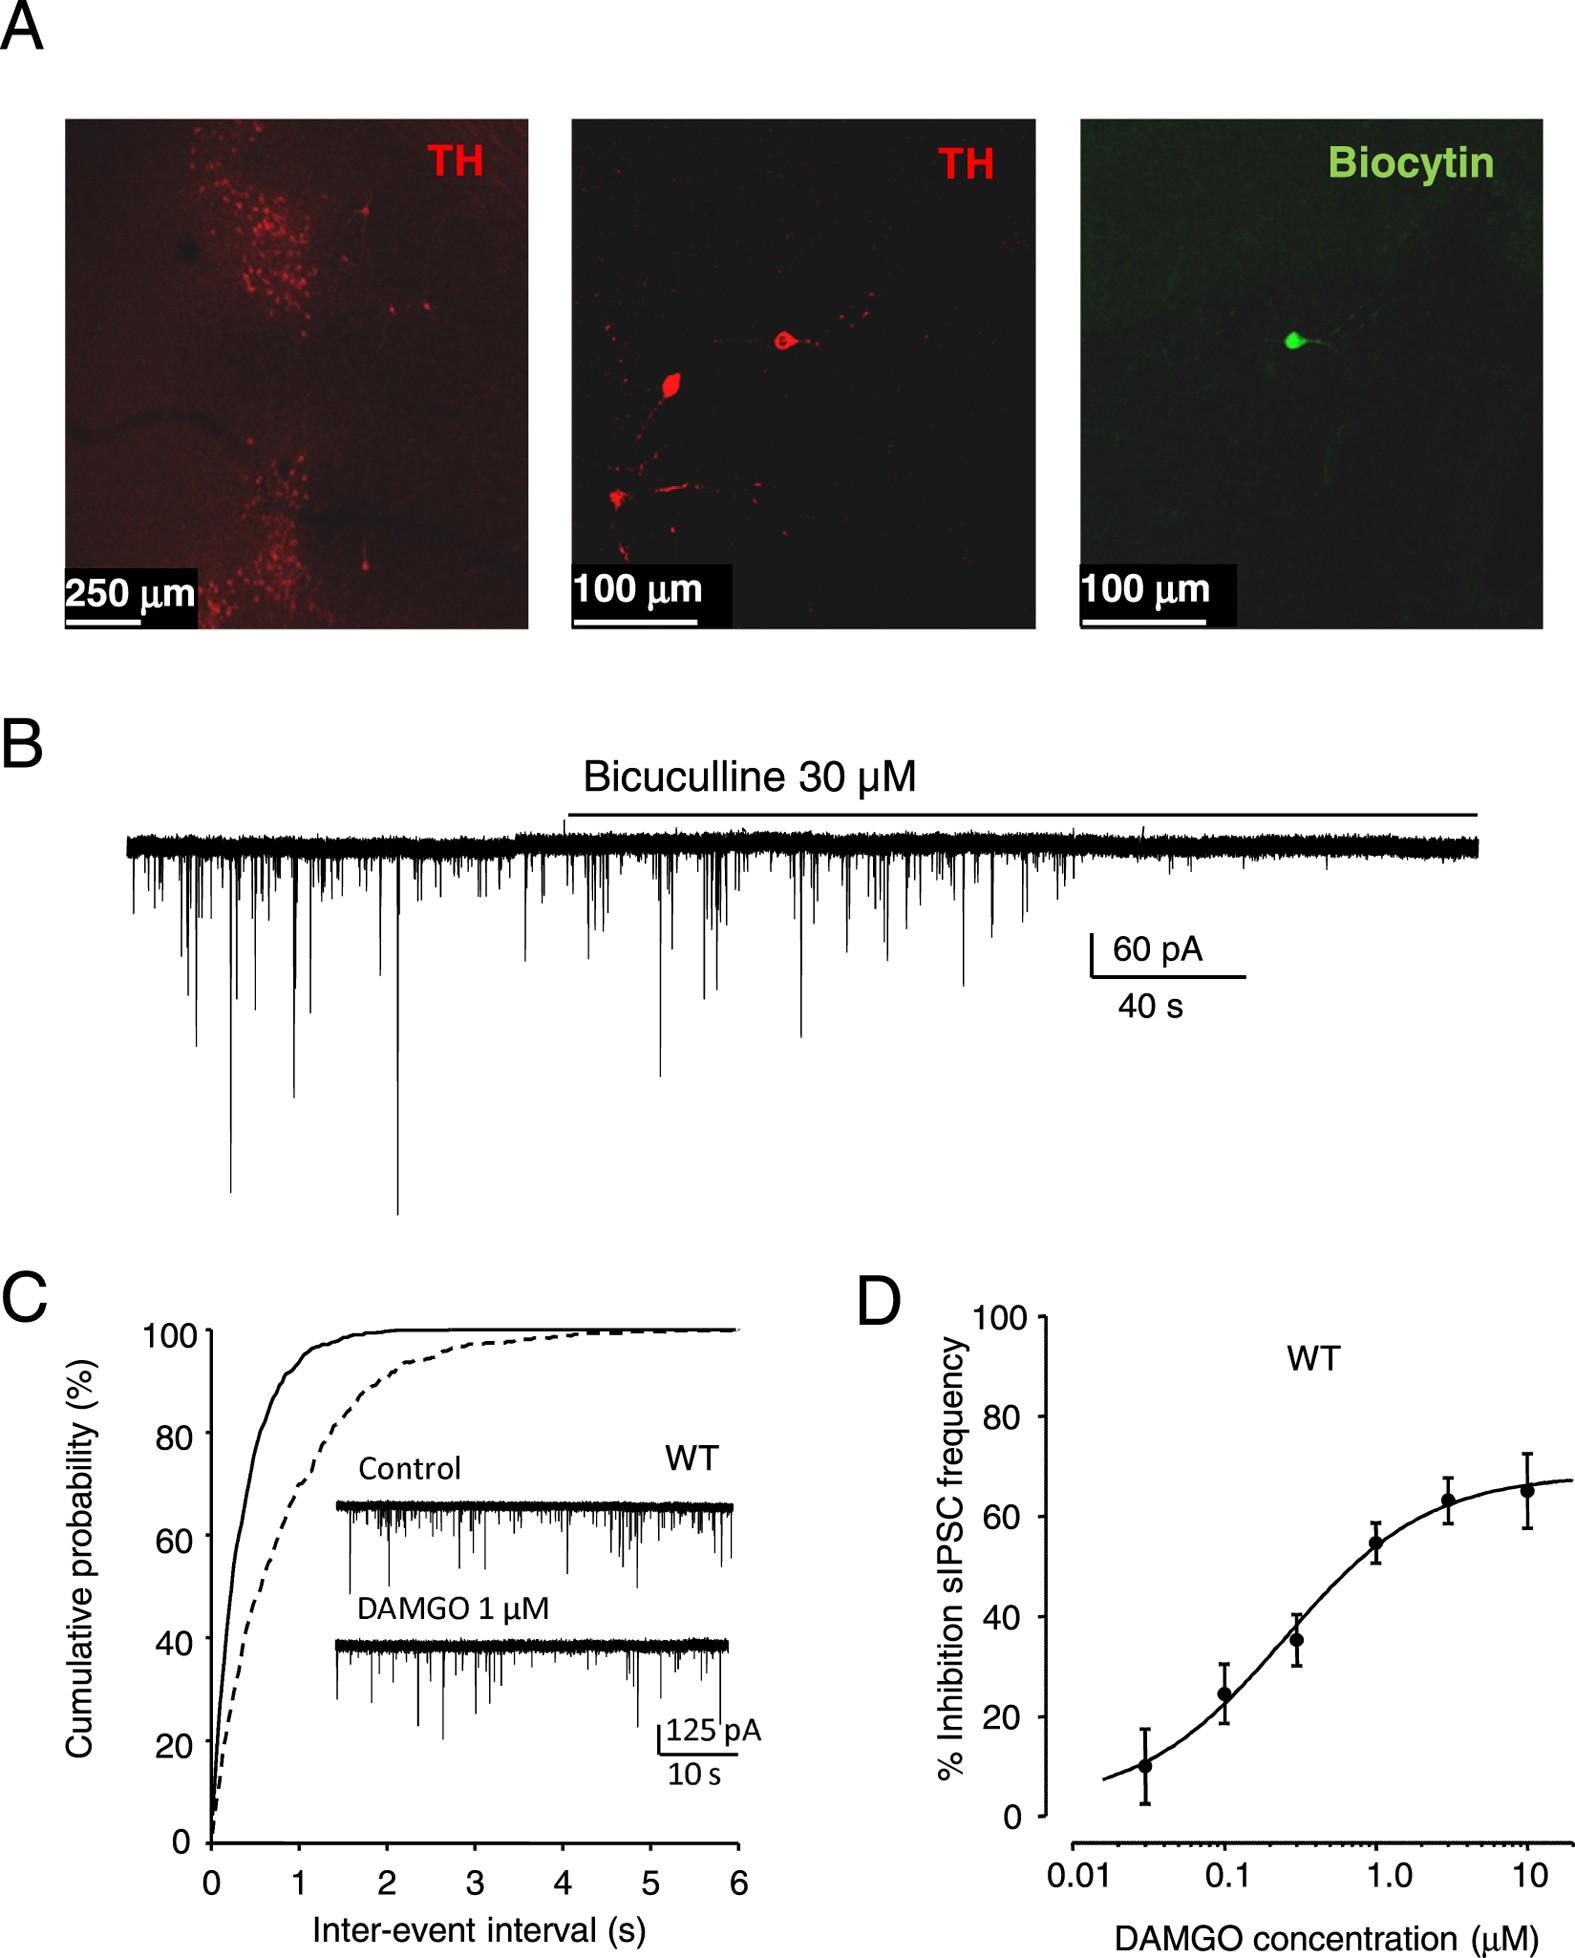 Morphine activation of mu opioid receptors causes disinhibition of neurons  in the ventral tegmental area mediated by β-arrestin2 and c-Src |  Scientific Reports